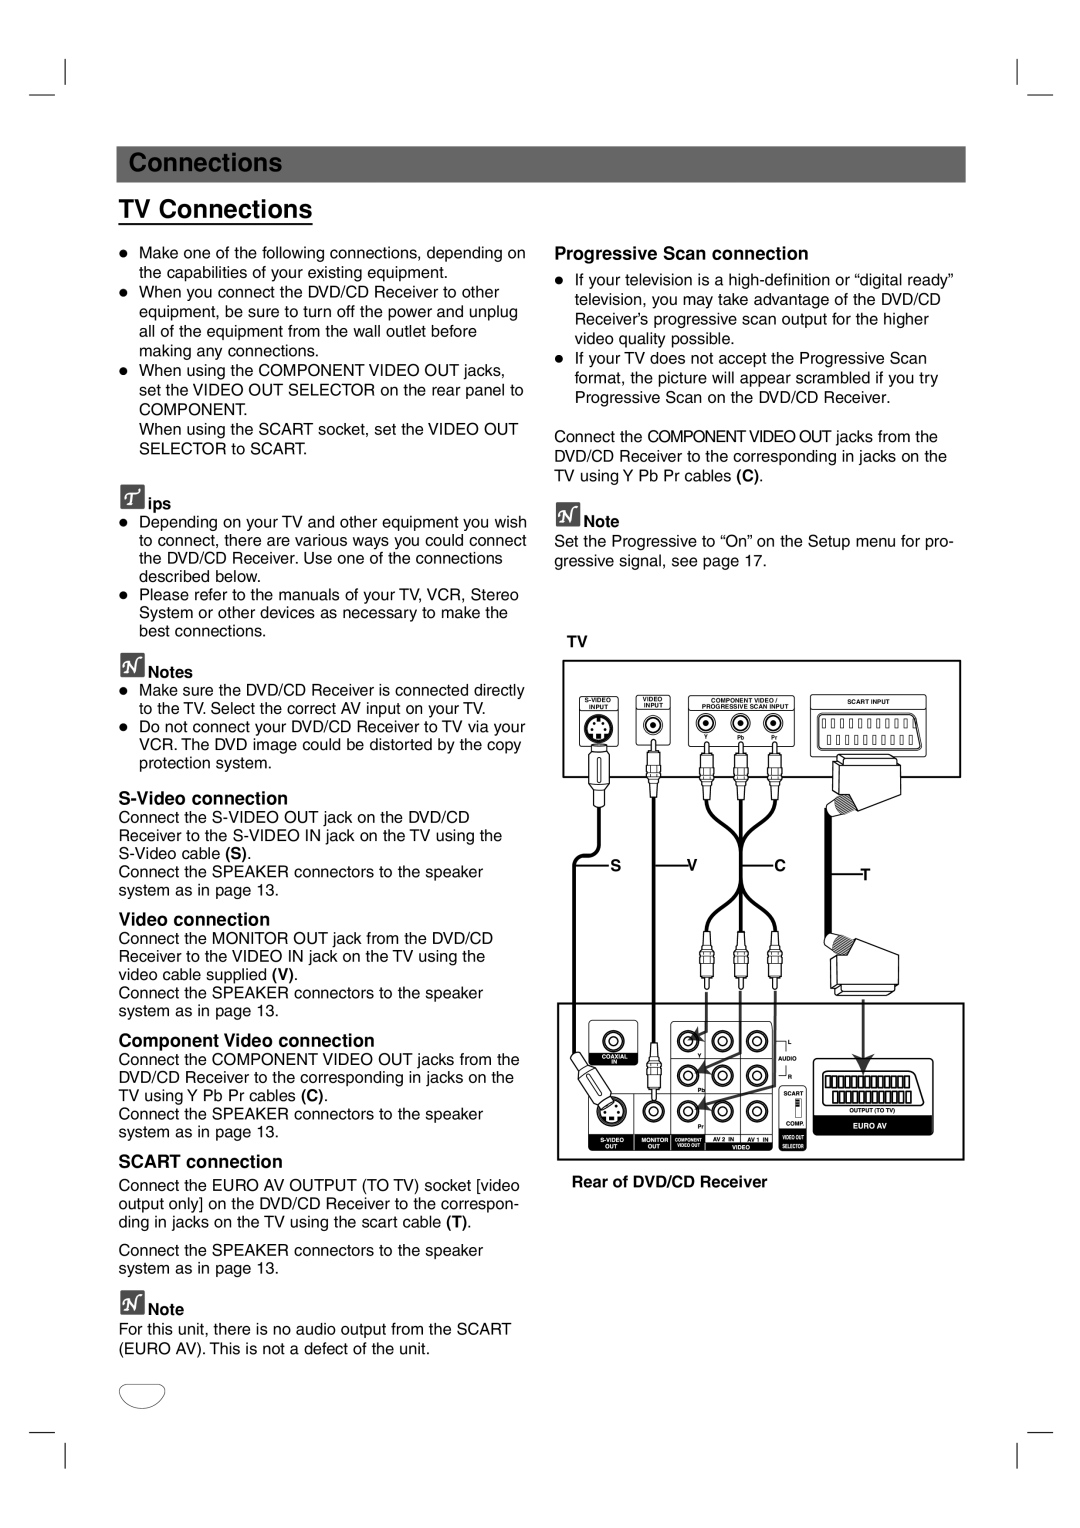 Toshiba SD-44HKSE owner manual Connections TV Connections, Component Video connection, Scart connection 